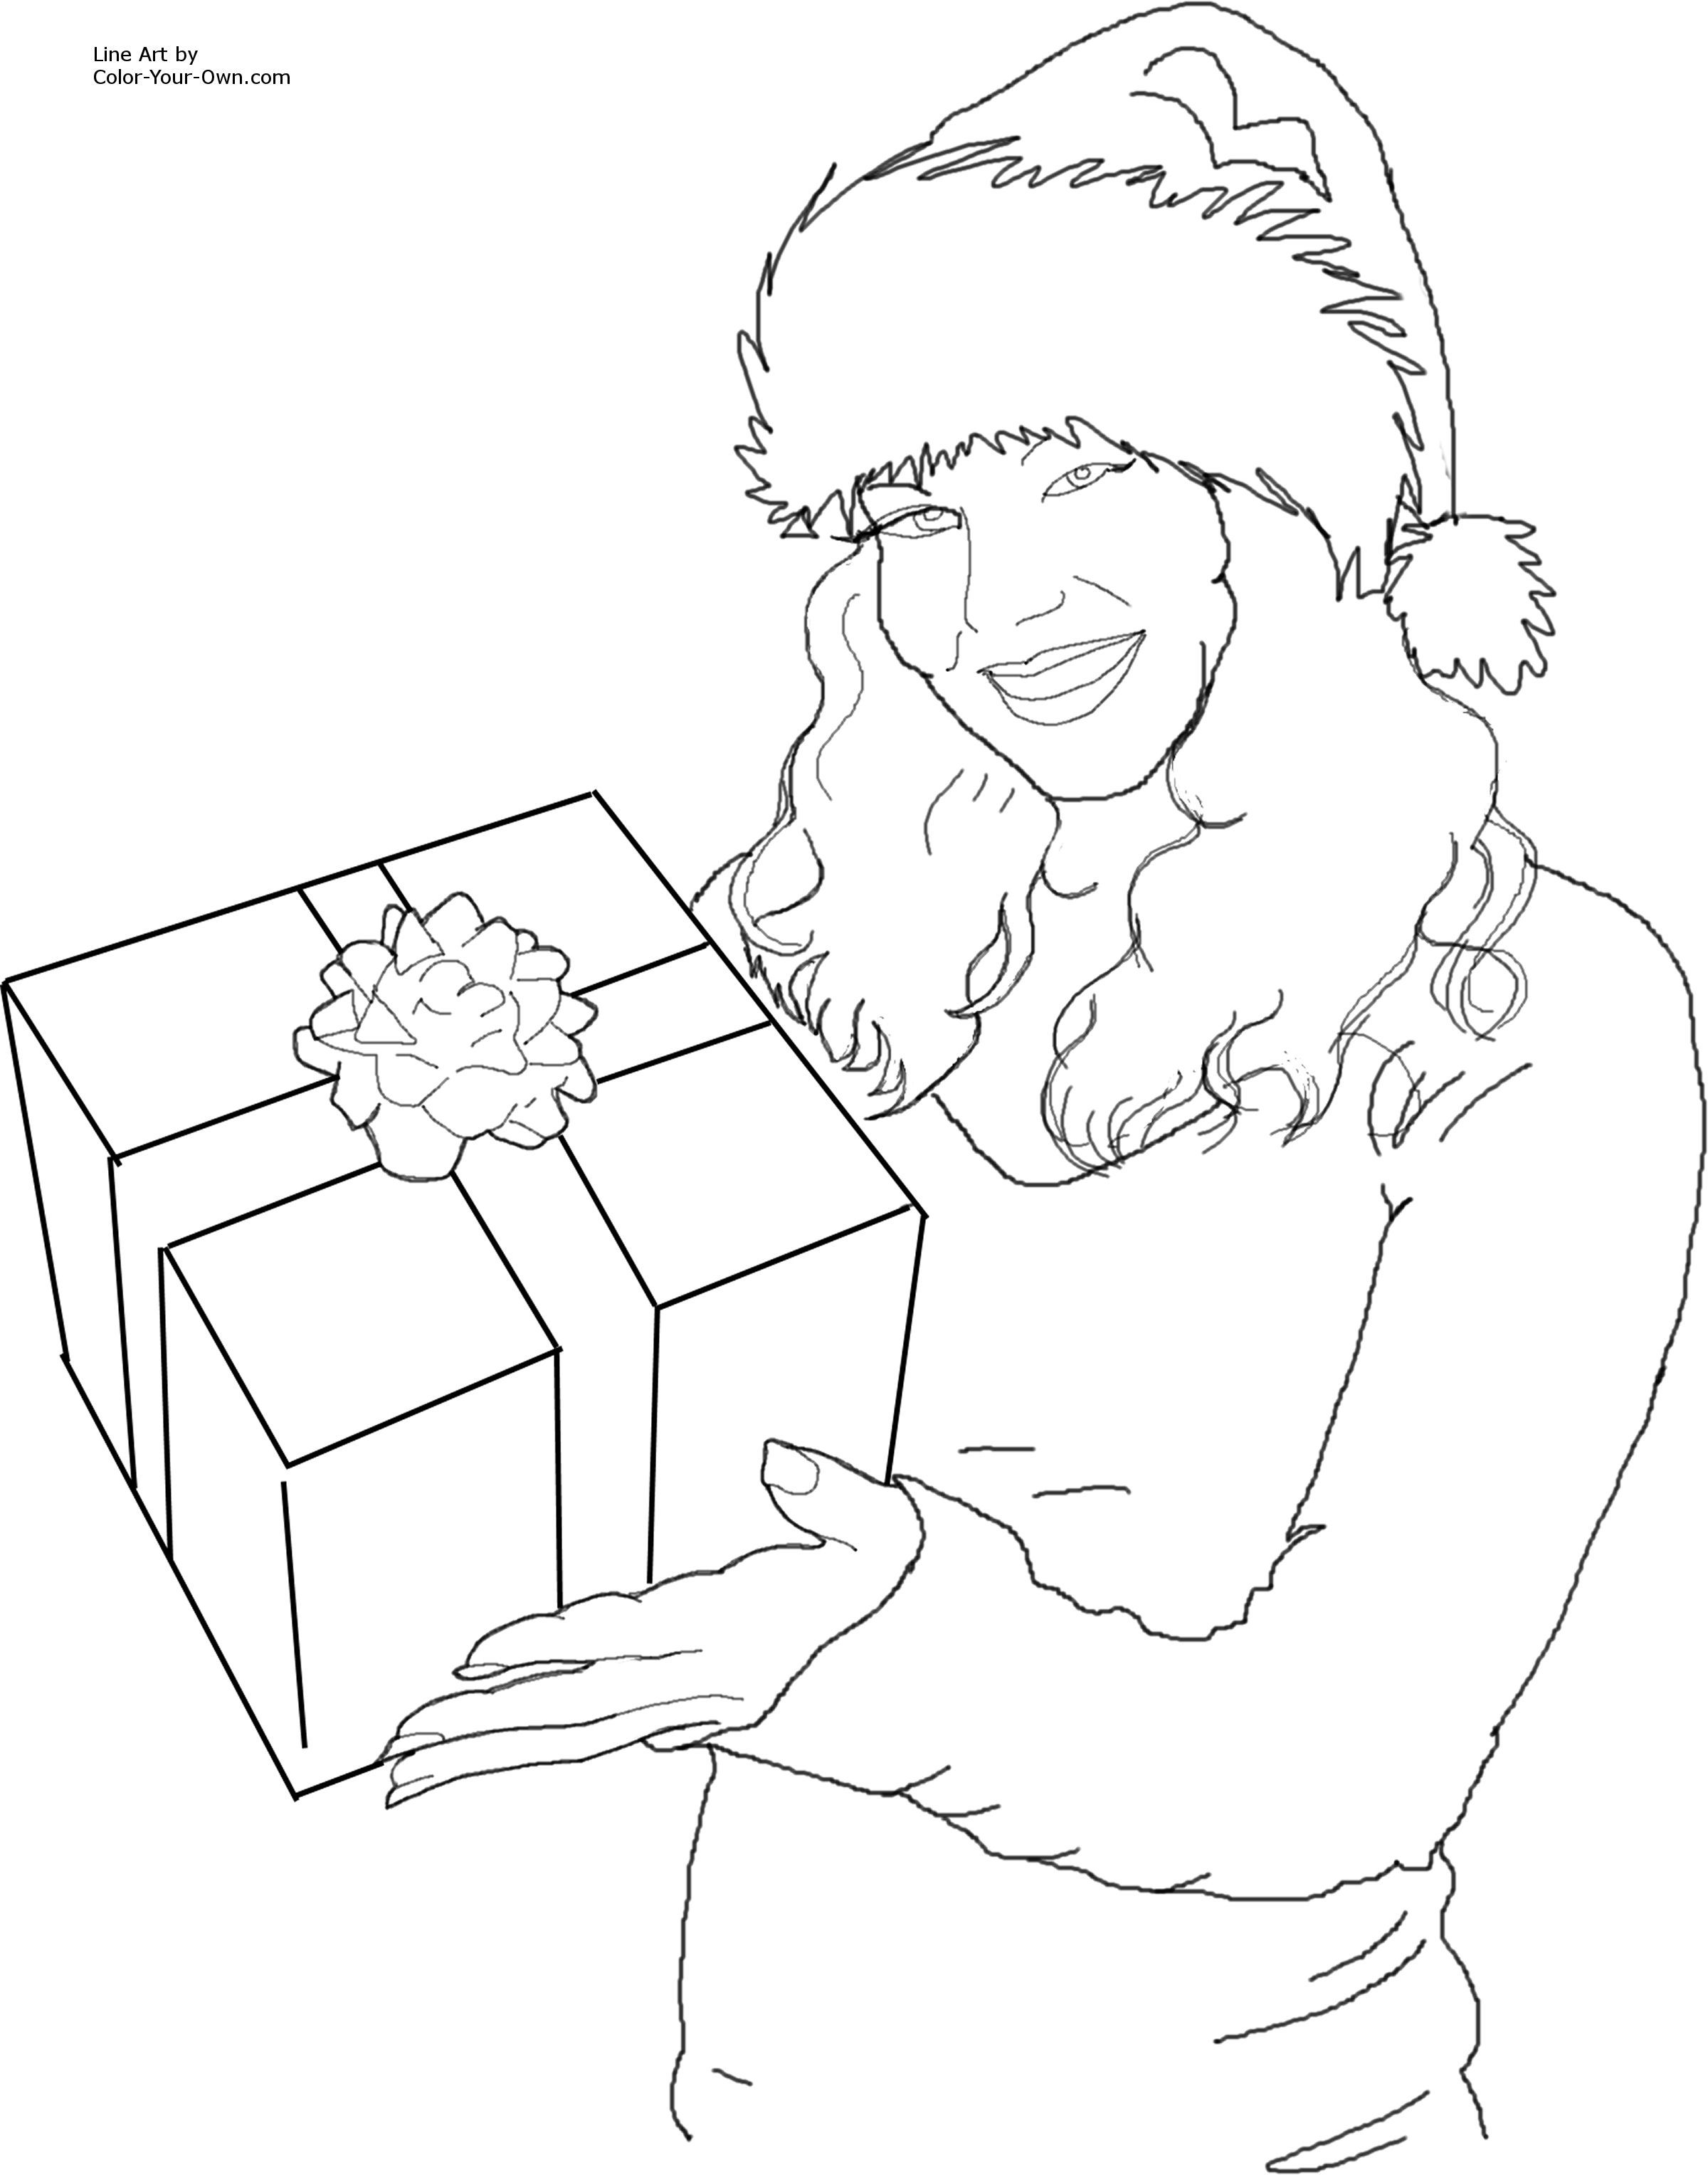 New Christmas coloring page for 2009 | Coloring Pages Blog